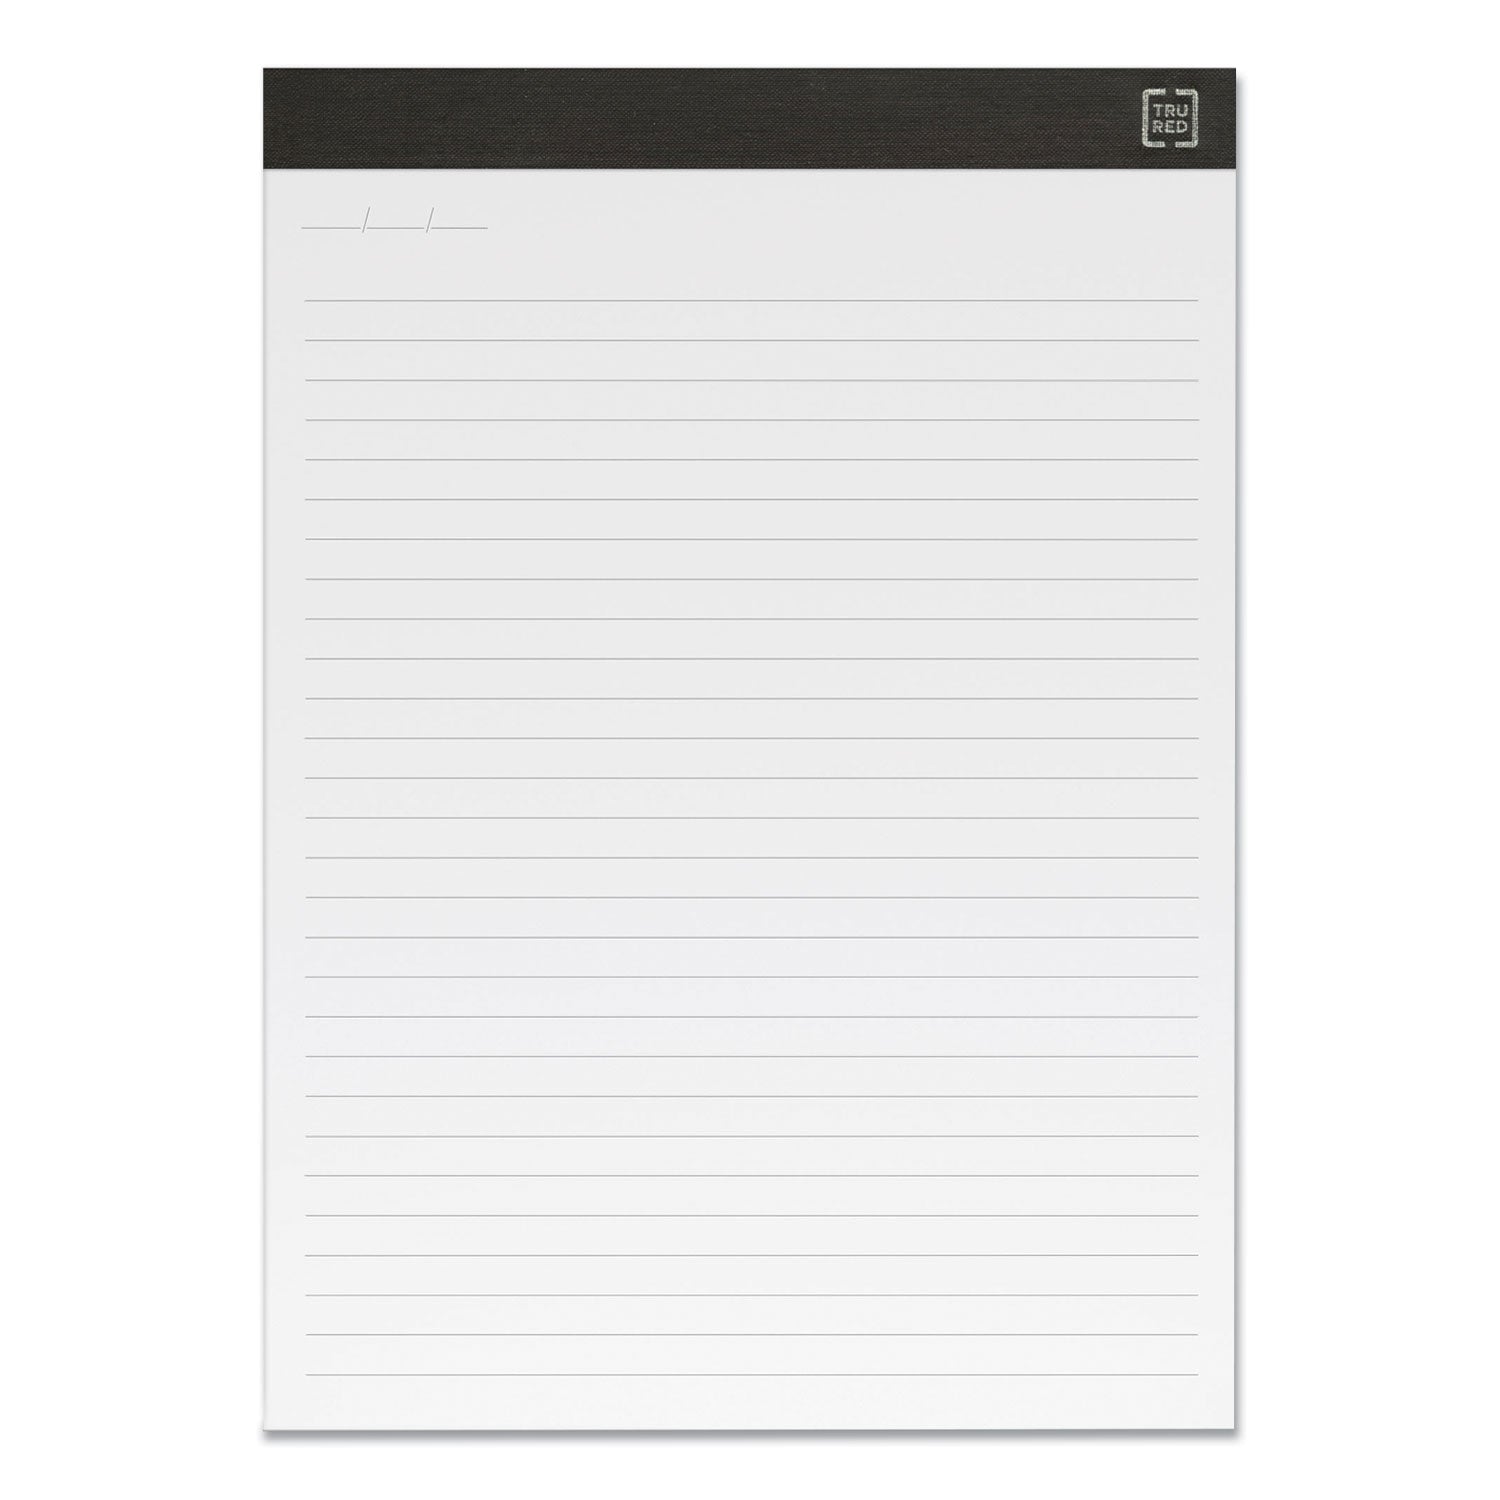 notepads-wide-legal-rule-50-white-85-x-1175-sheets-12-pack_tud24419921 - 2